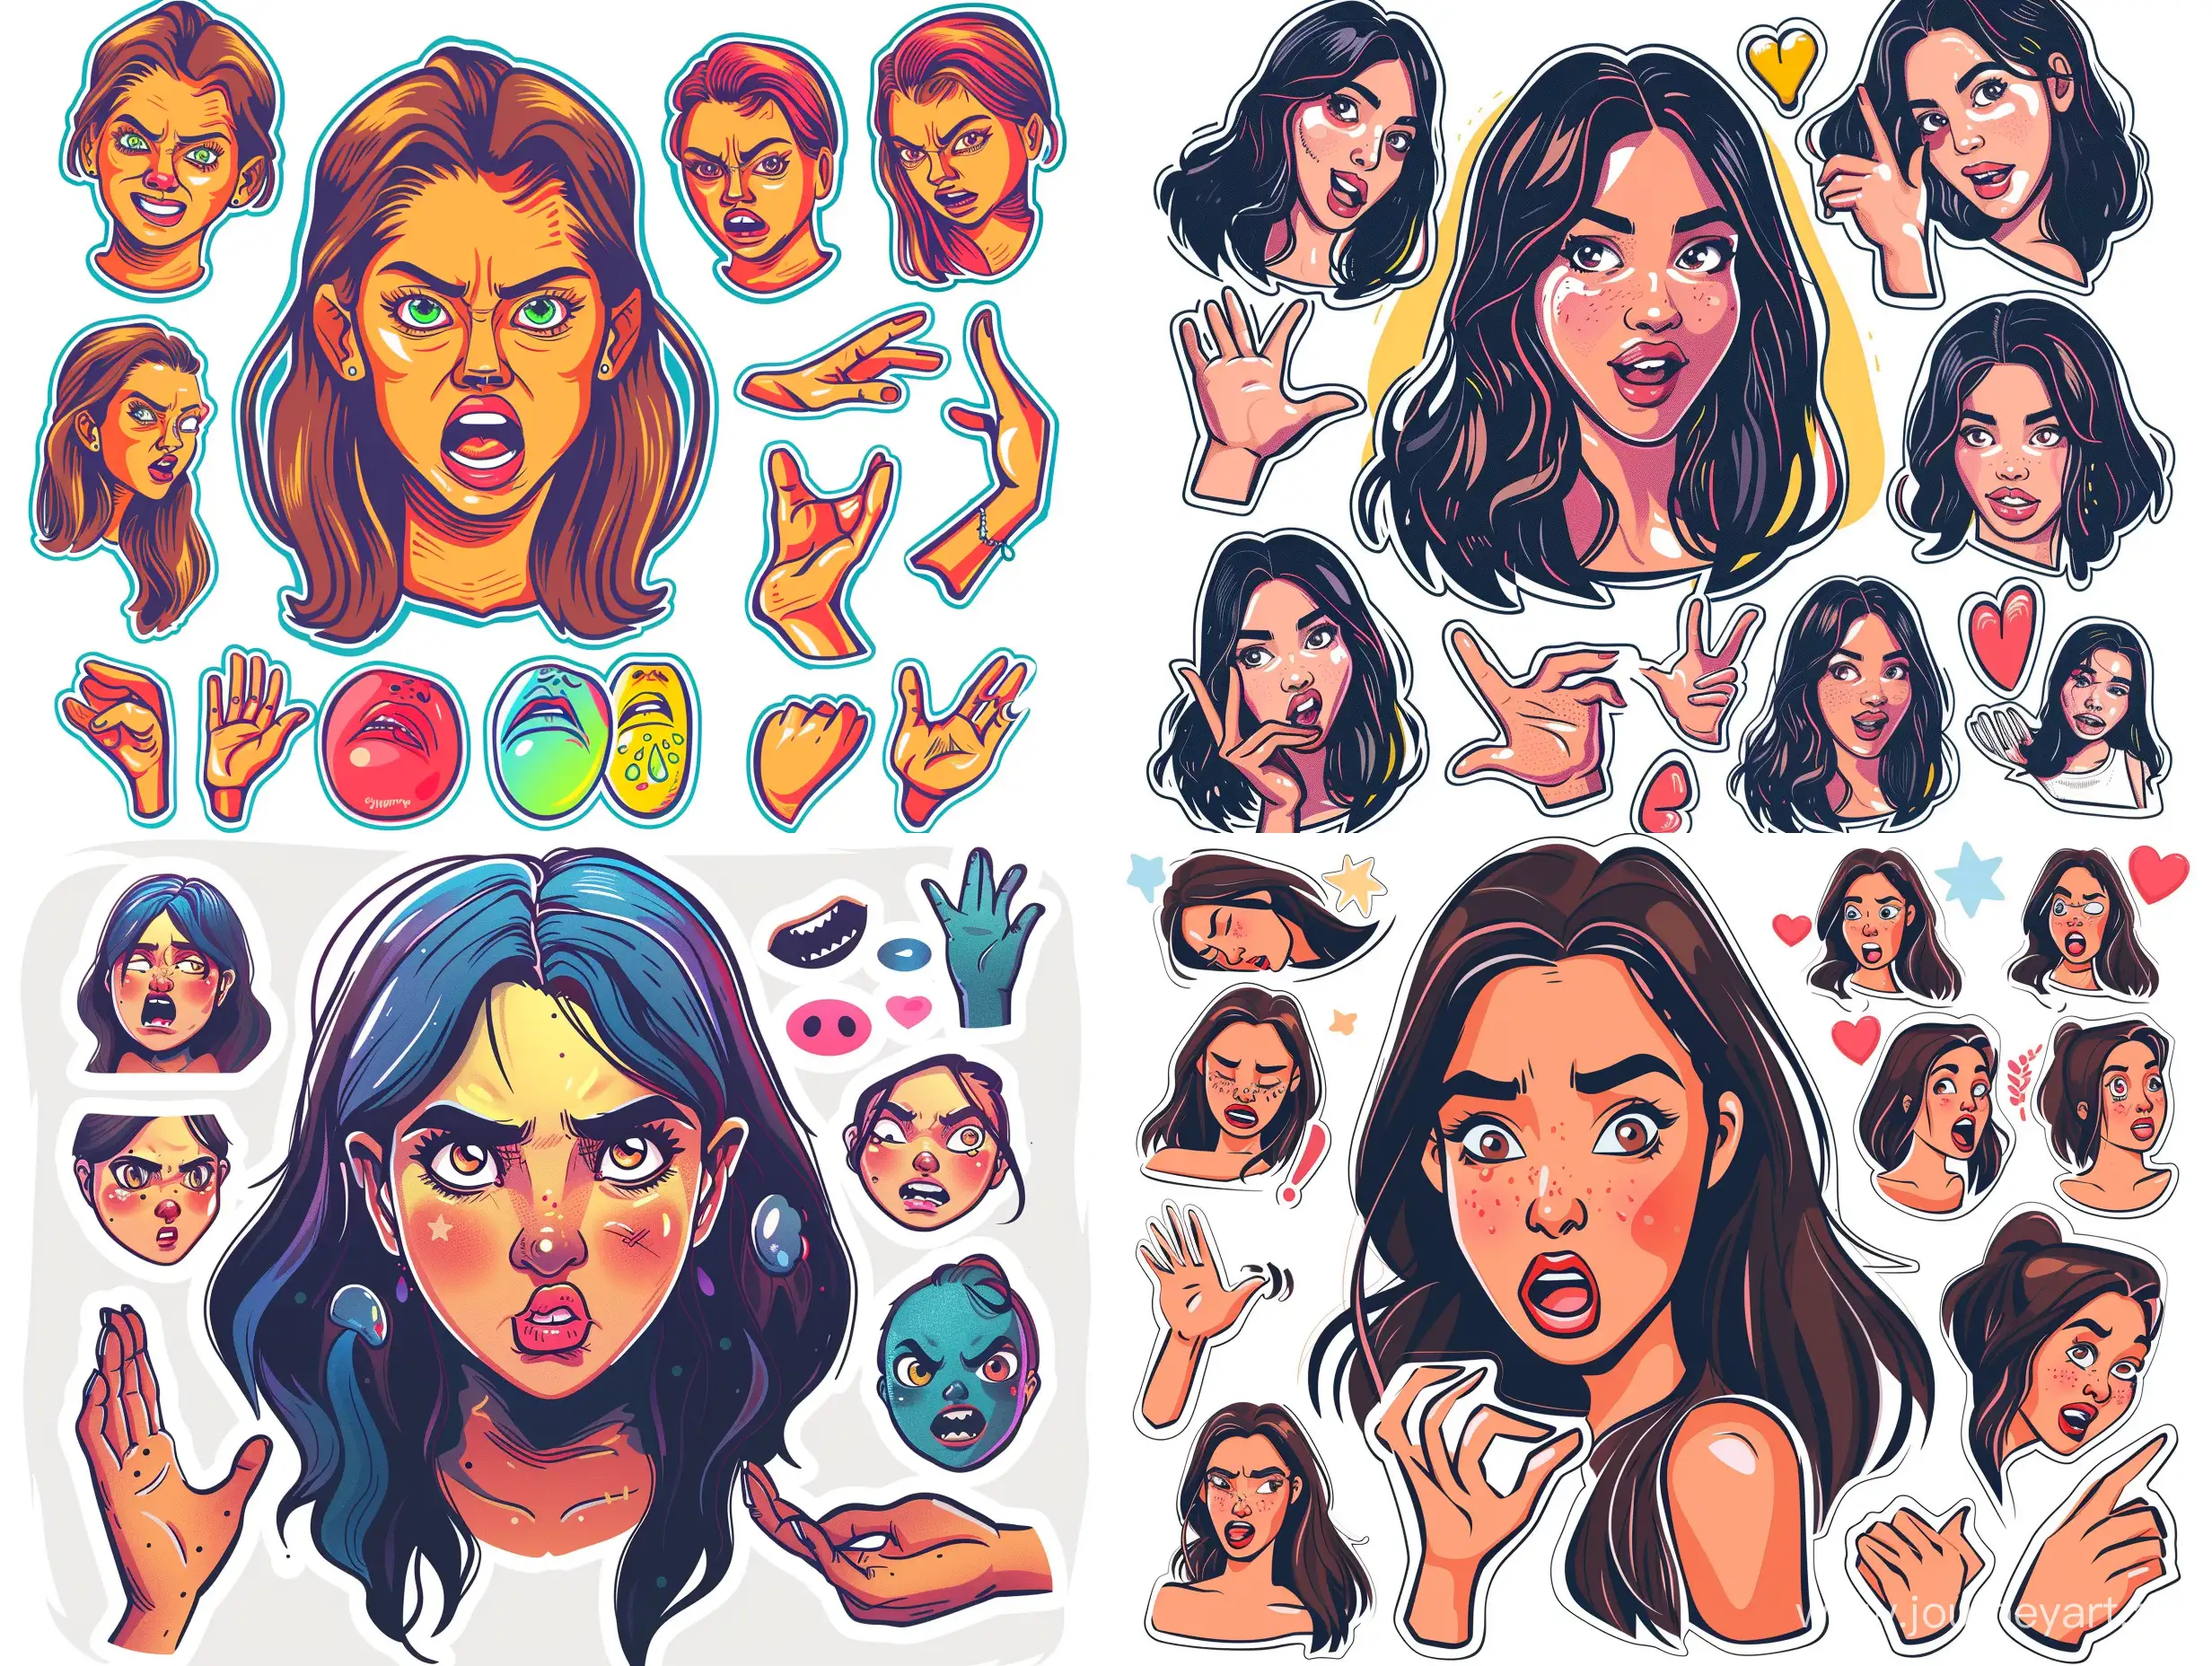 Slavic-Girl-Expressing-Various-Emotions-with-Colorful-Sticker-Accents-on-White-Background